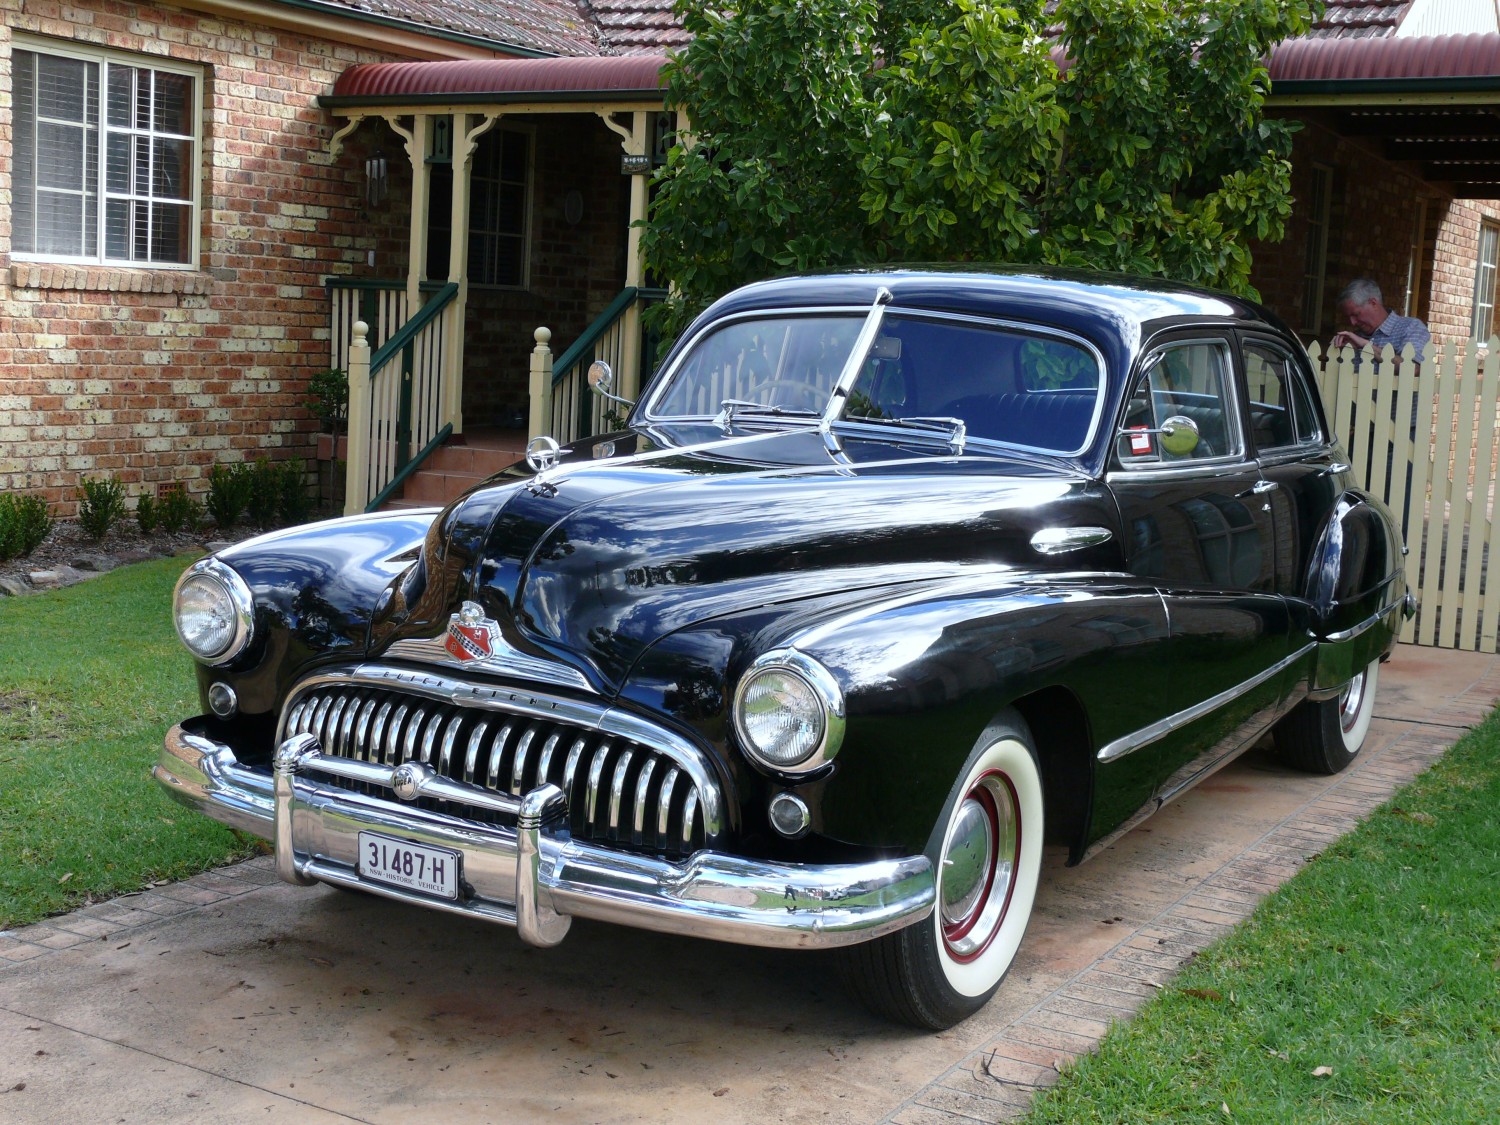 1947 Buick Super - 47buick - Shannons Club